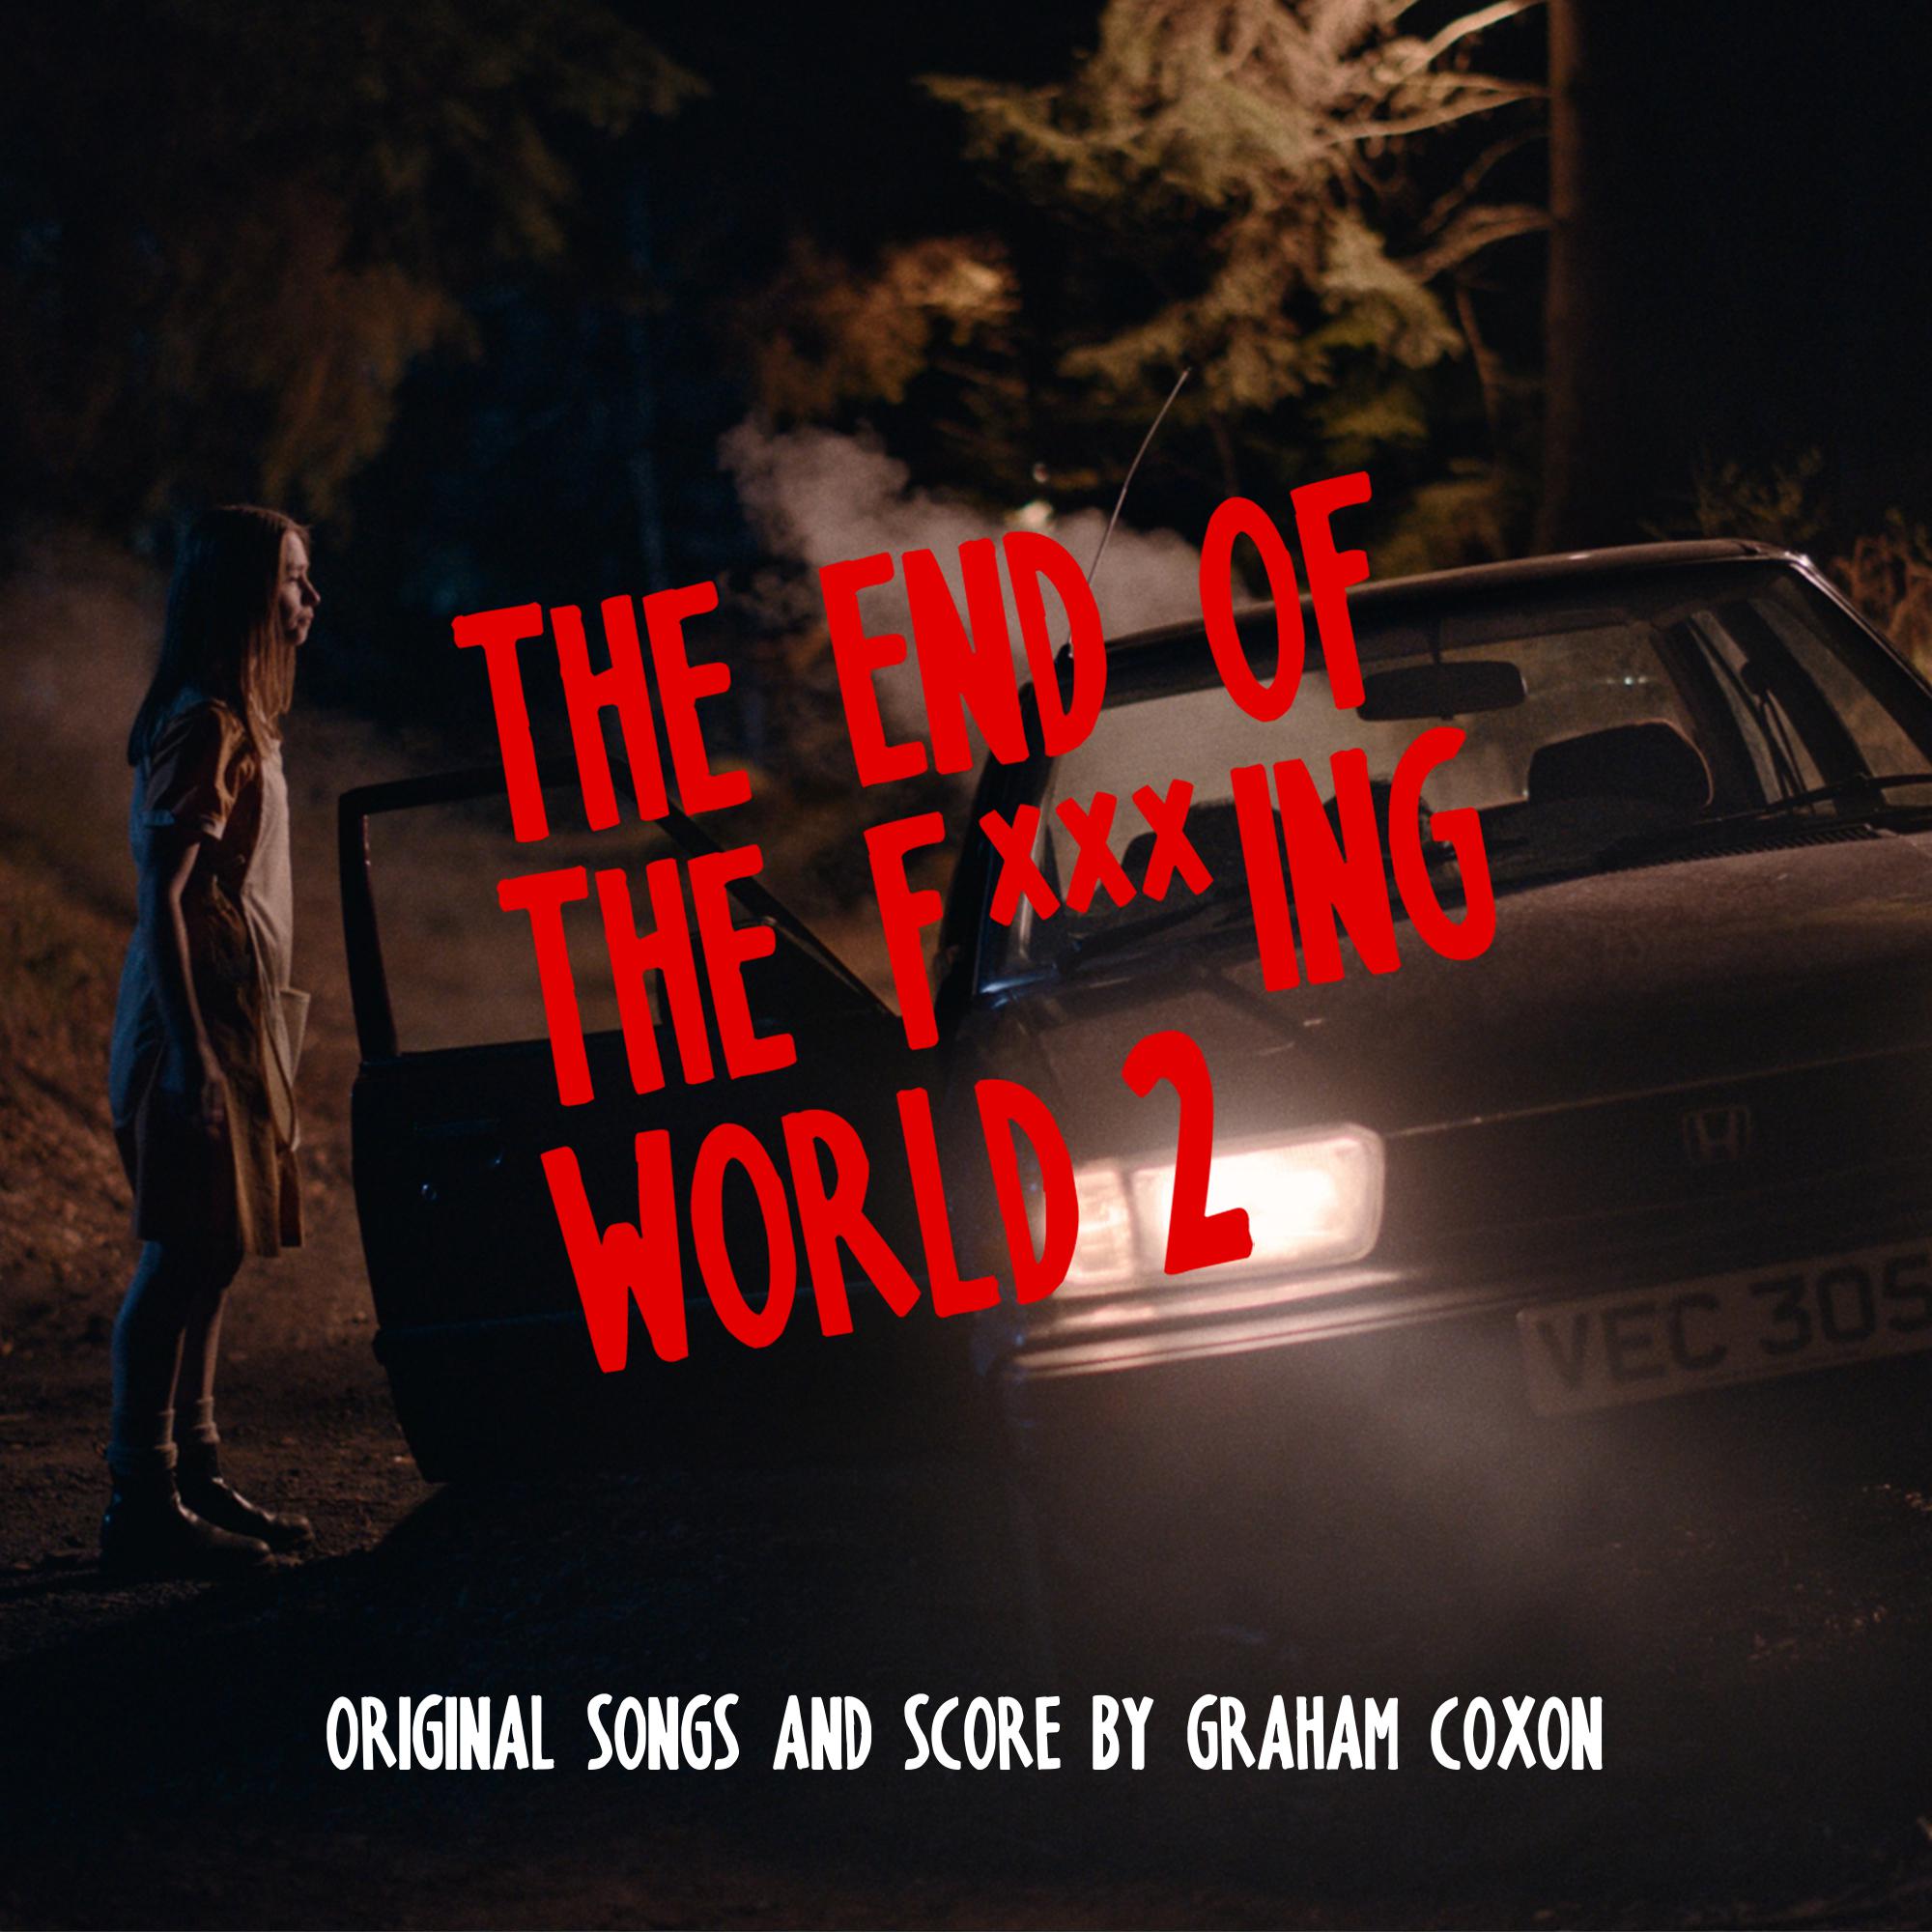 She Knows歌词 歌手Graham Coxon-专辑The End of The F***ing World 2 (Original Songs and Score)-单曲《She Knows》LRC歌词下载